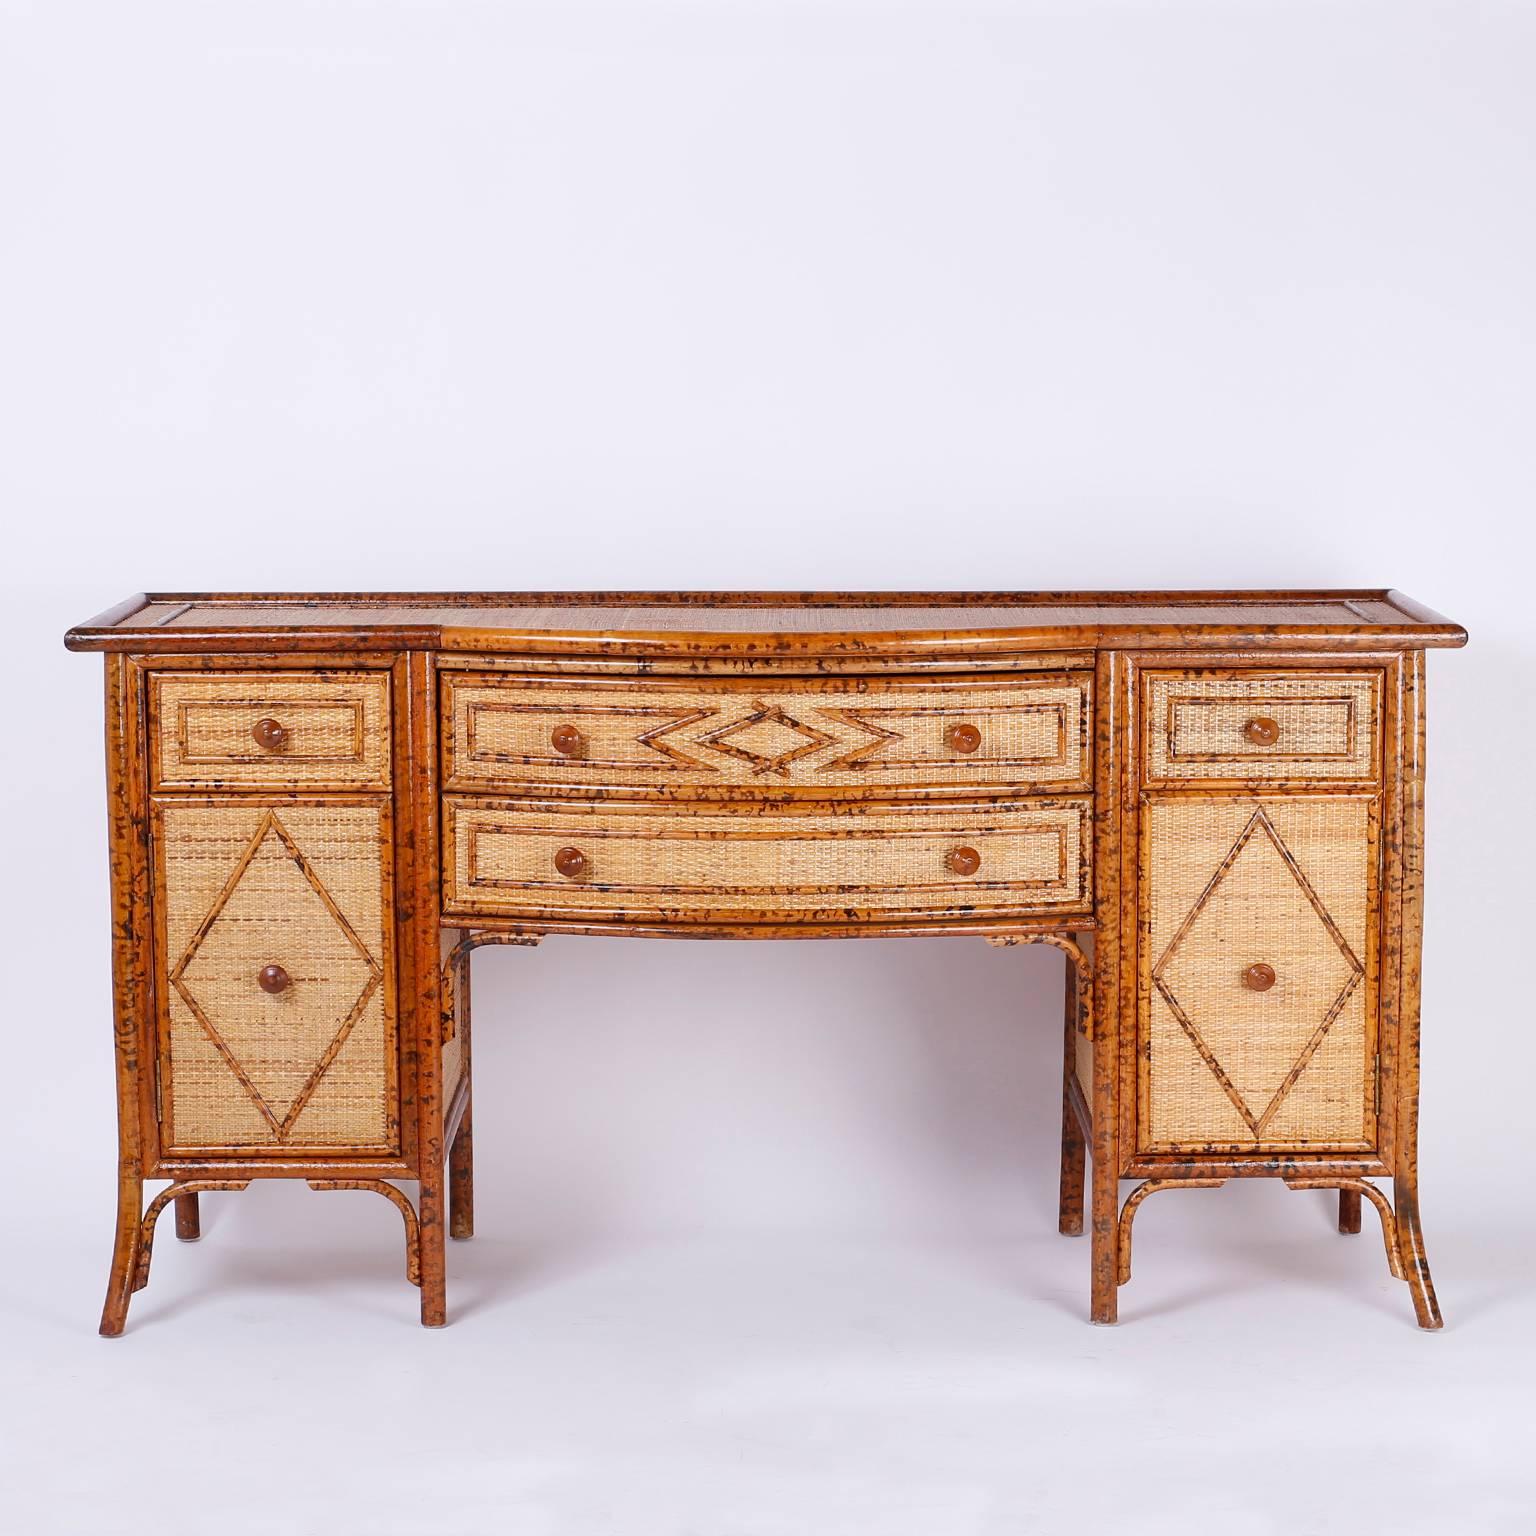 Handsome midcentury British Colonial style credenza or sideboard featuring a faux bamboo and grass cloth facade that gives this bow front serving piece an organic casual elegance.

A rare form in bamboo, this pieces also works well in an Anglo